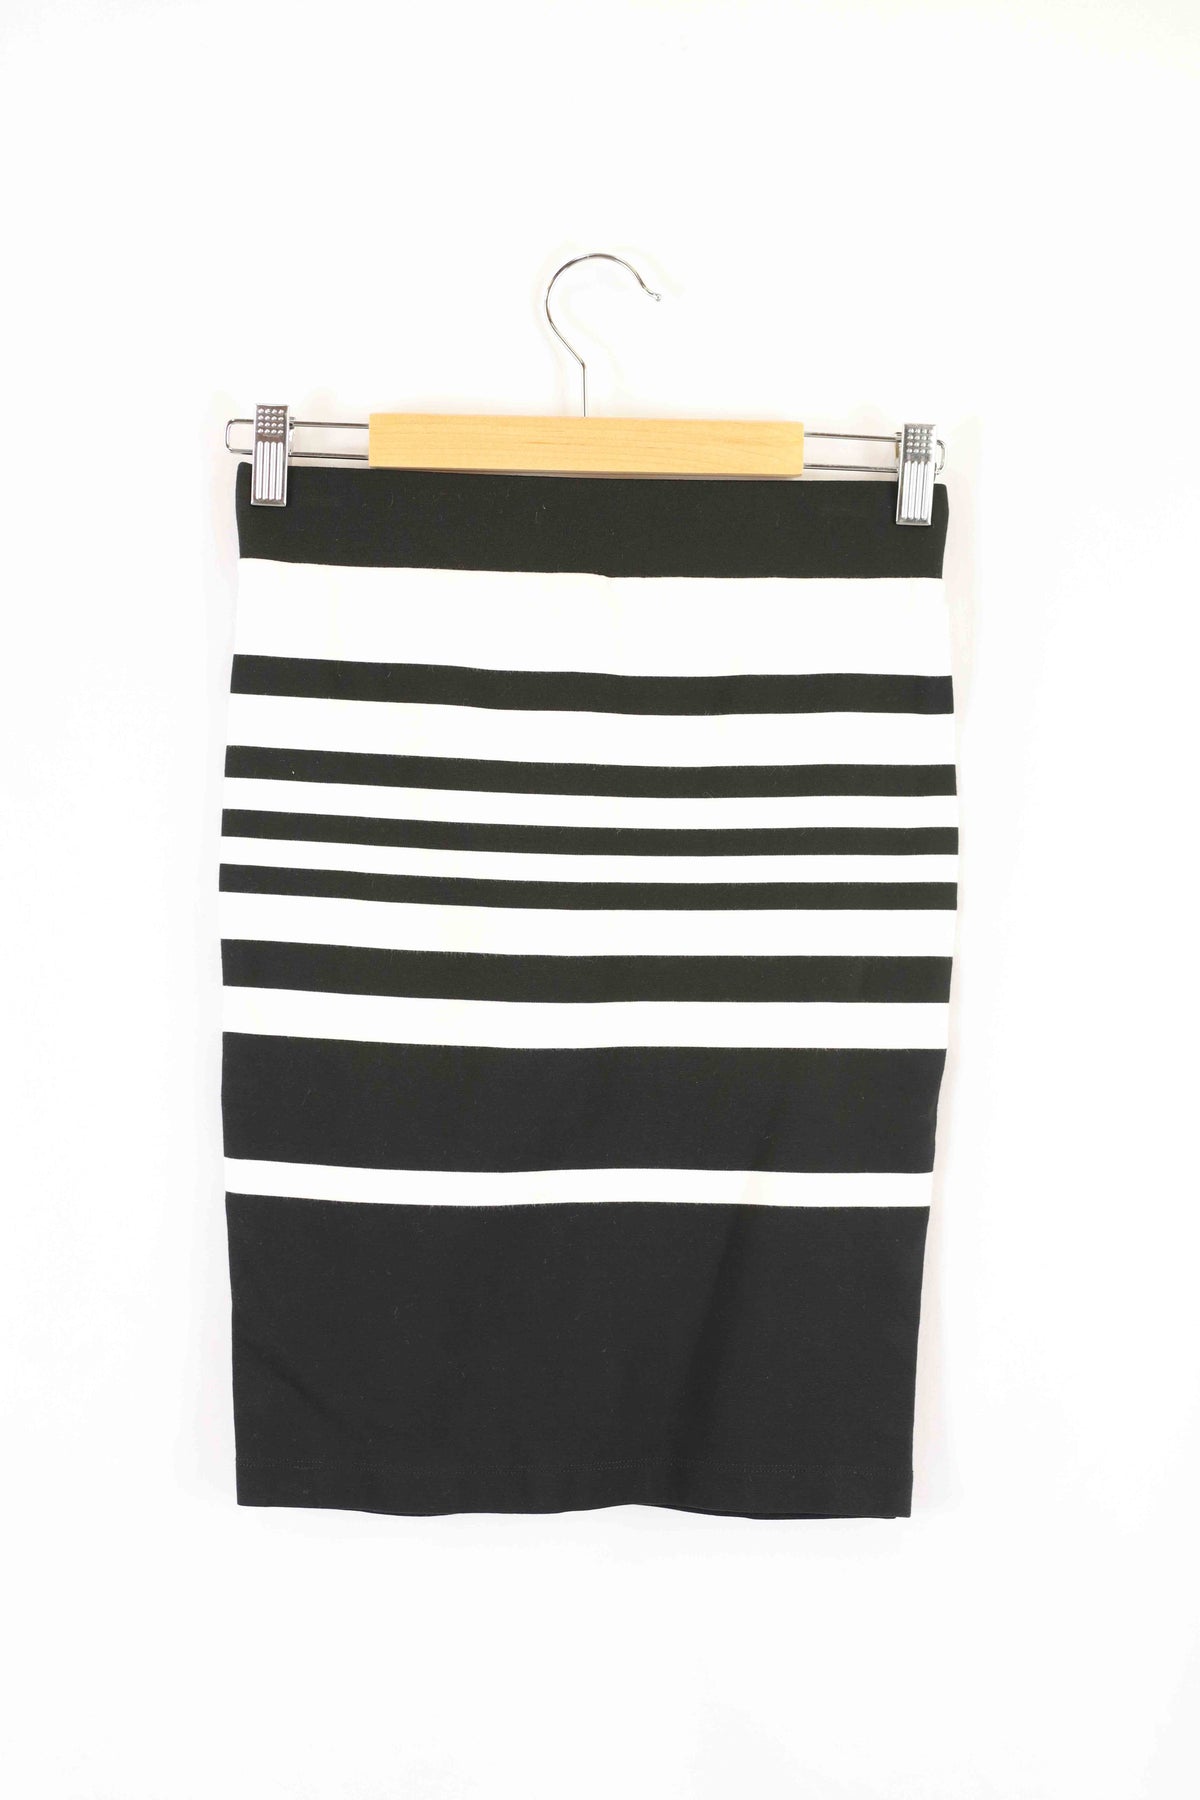 Witchery Black And White Striped Skirt 8